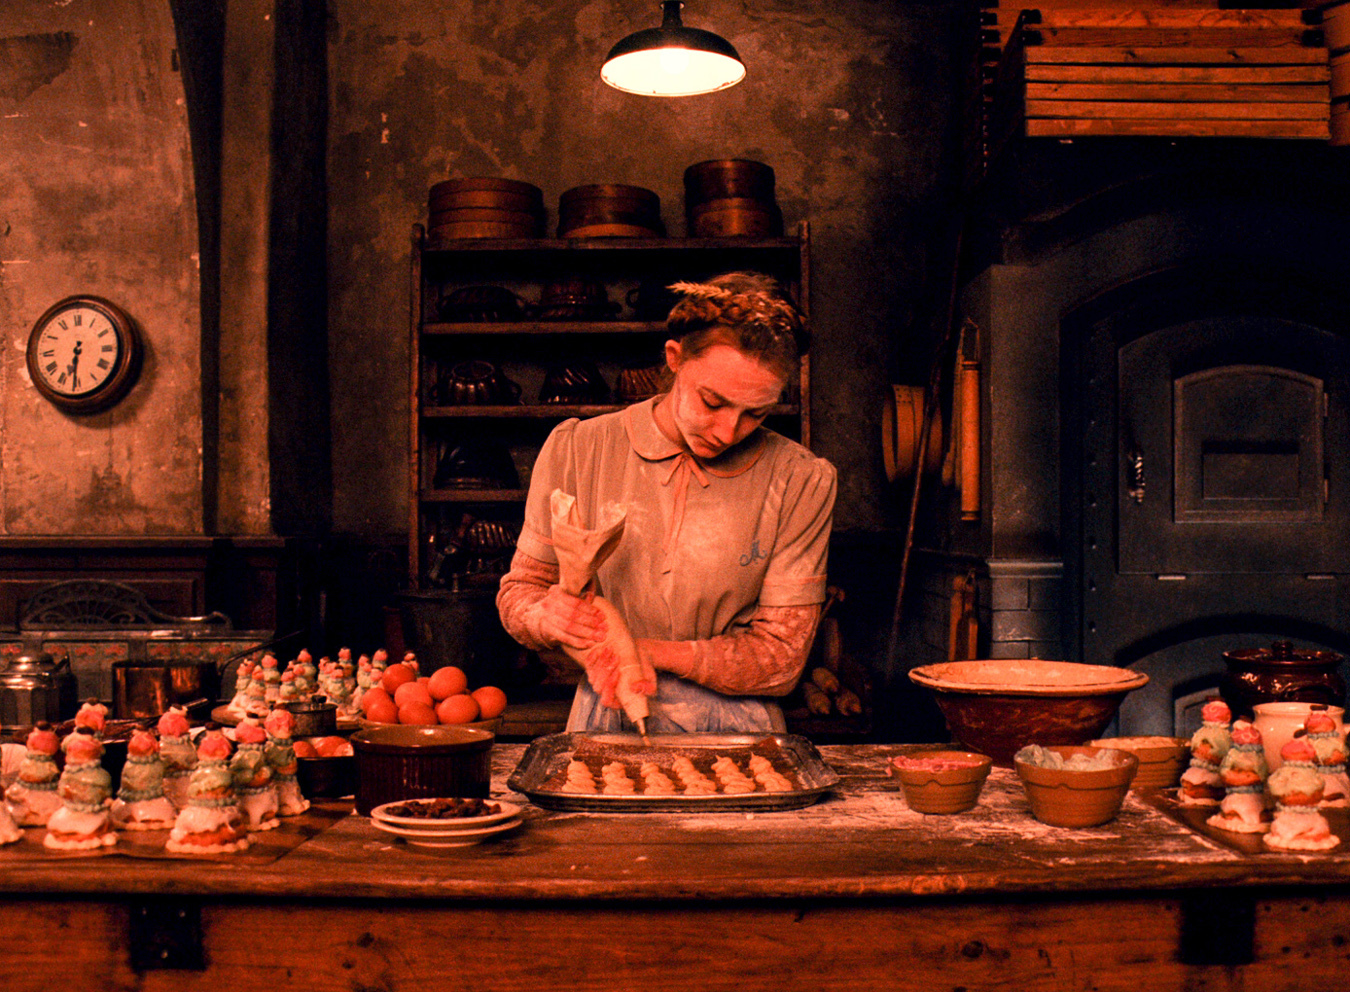 Saoirse Ronan in The Grand Budapest Hotel (2014)